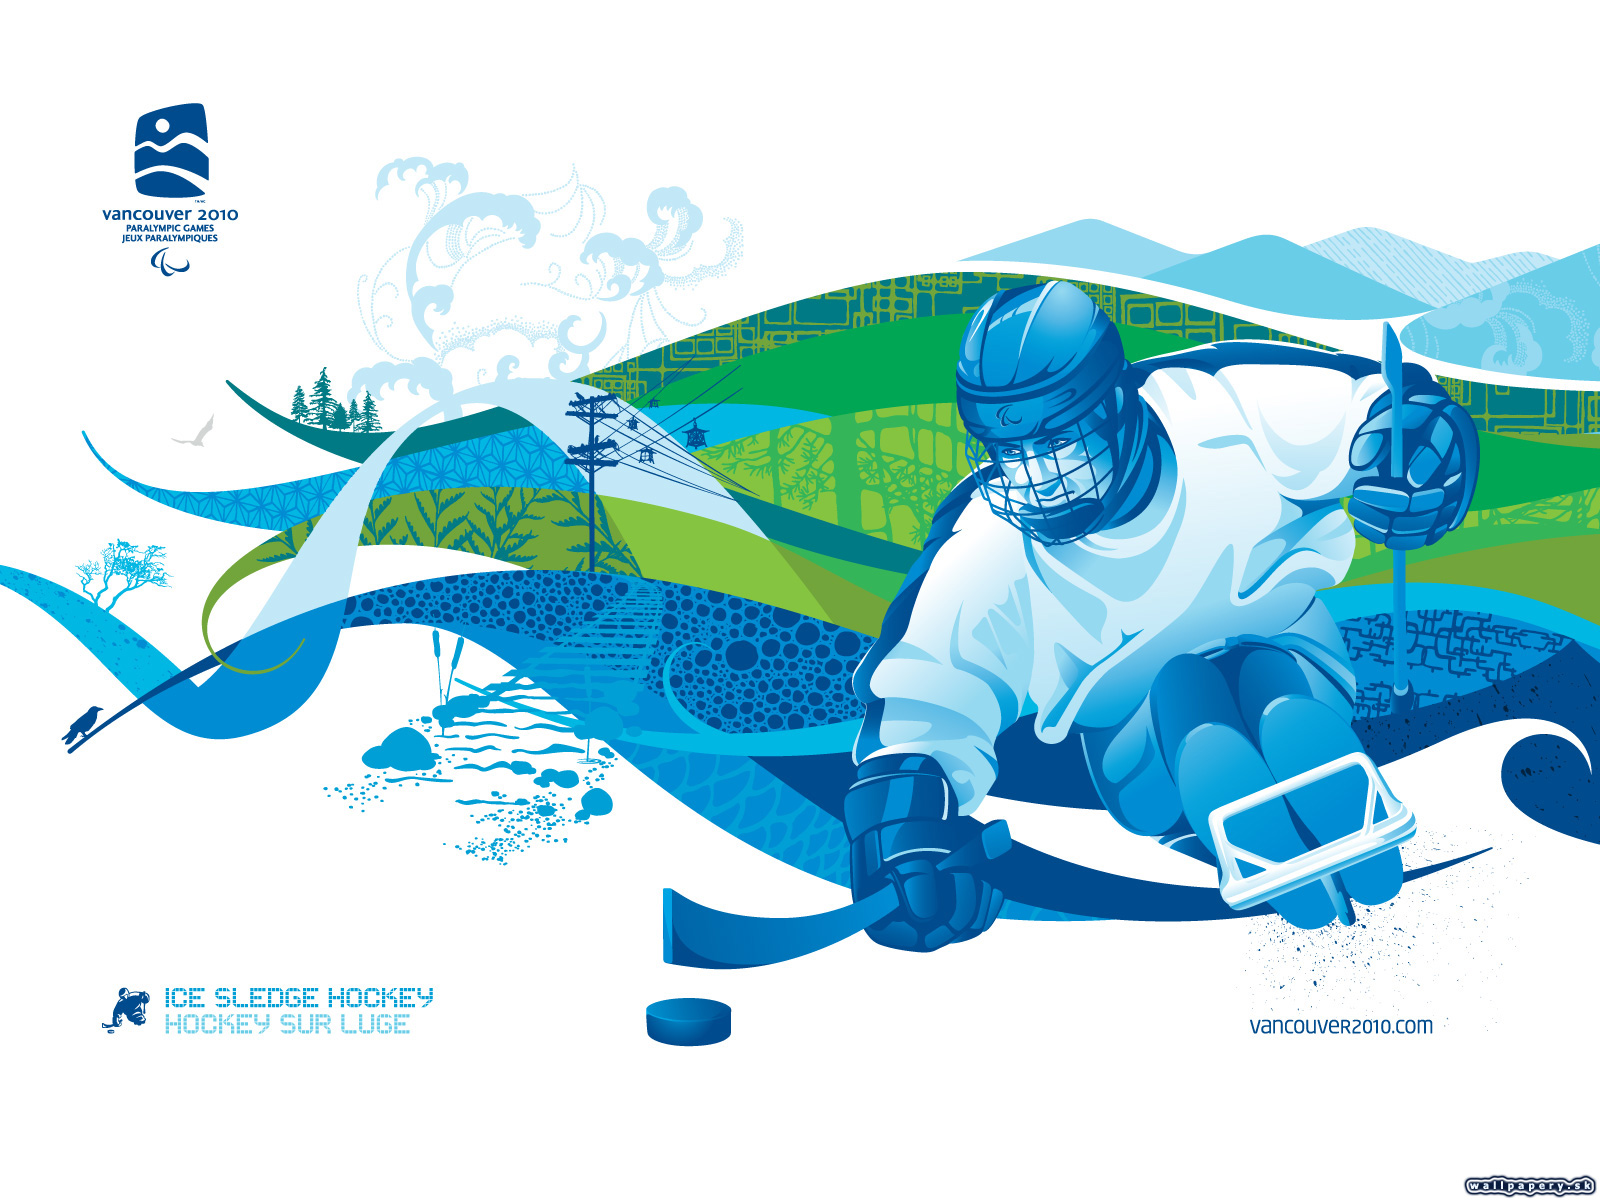 Vancouver 2010 - The Official Video Game of the Olympic Winter Games - wallpaper 10